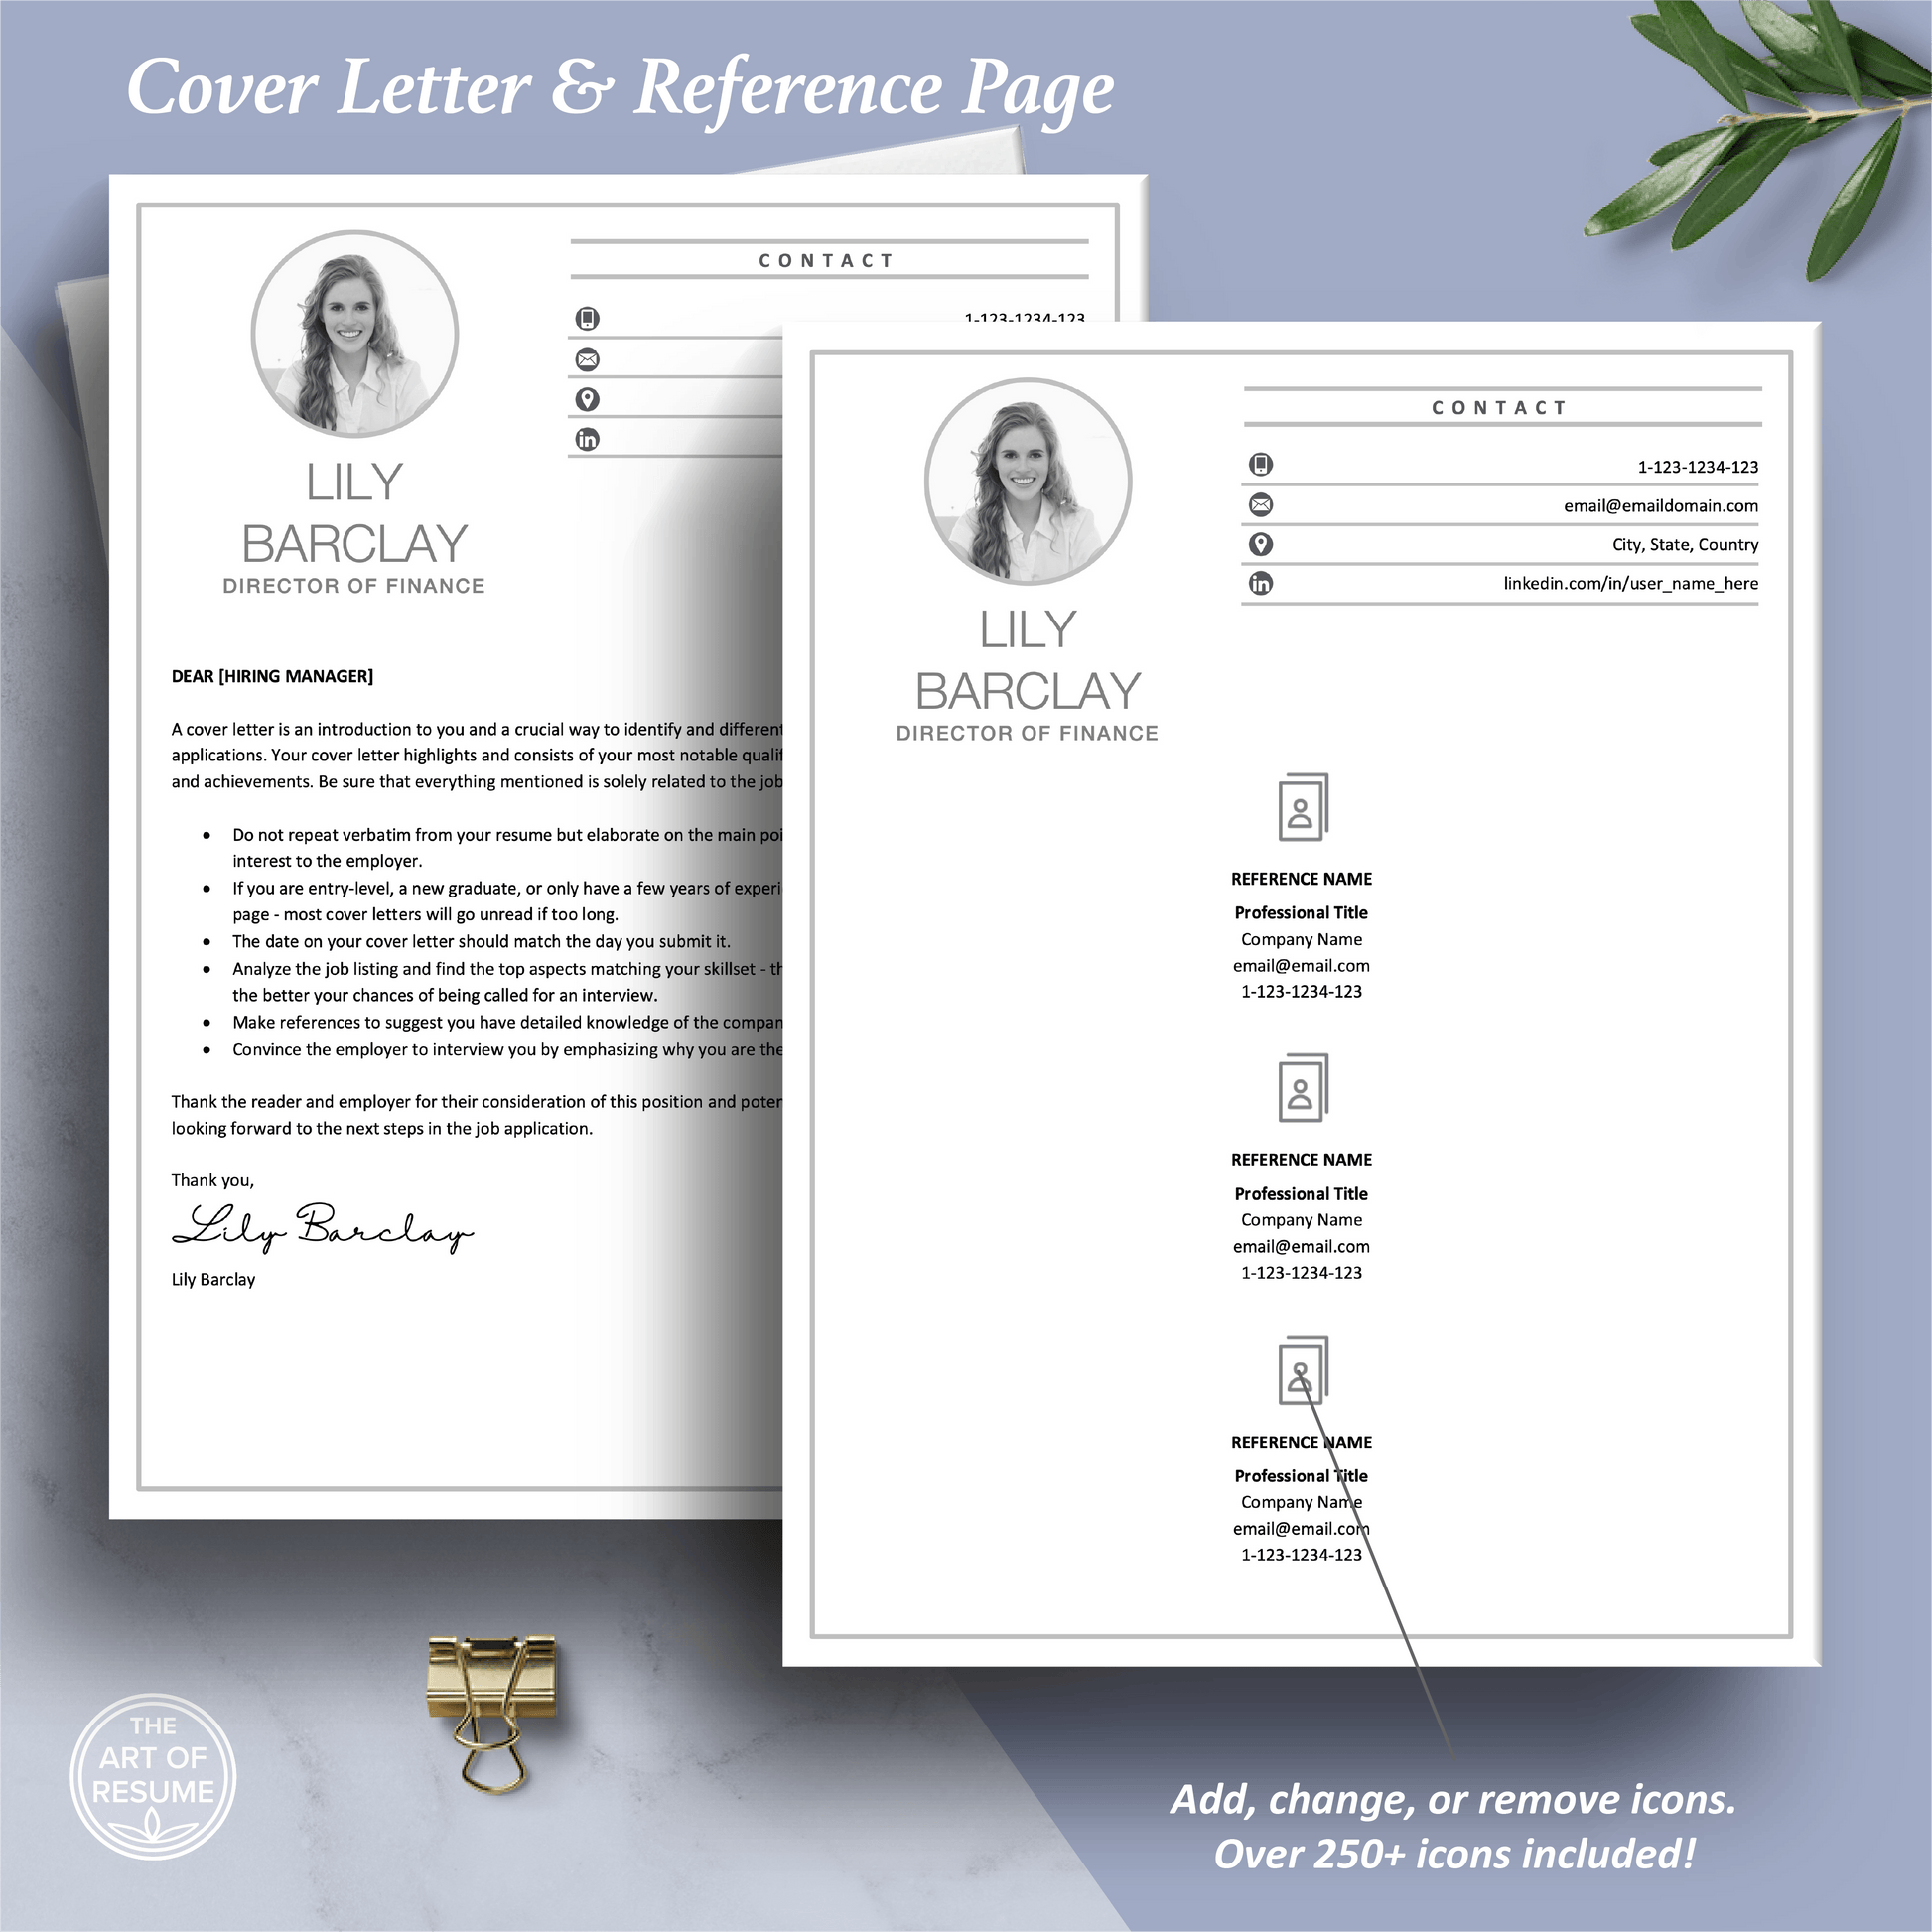 Resume Template Photo | Professional CV Template Download - The Art of Resume